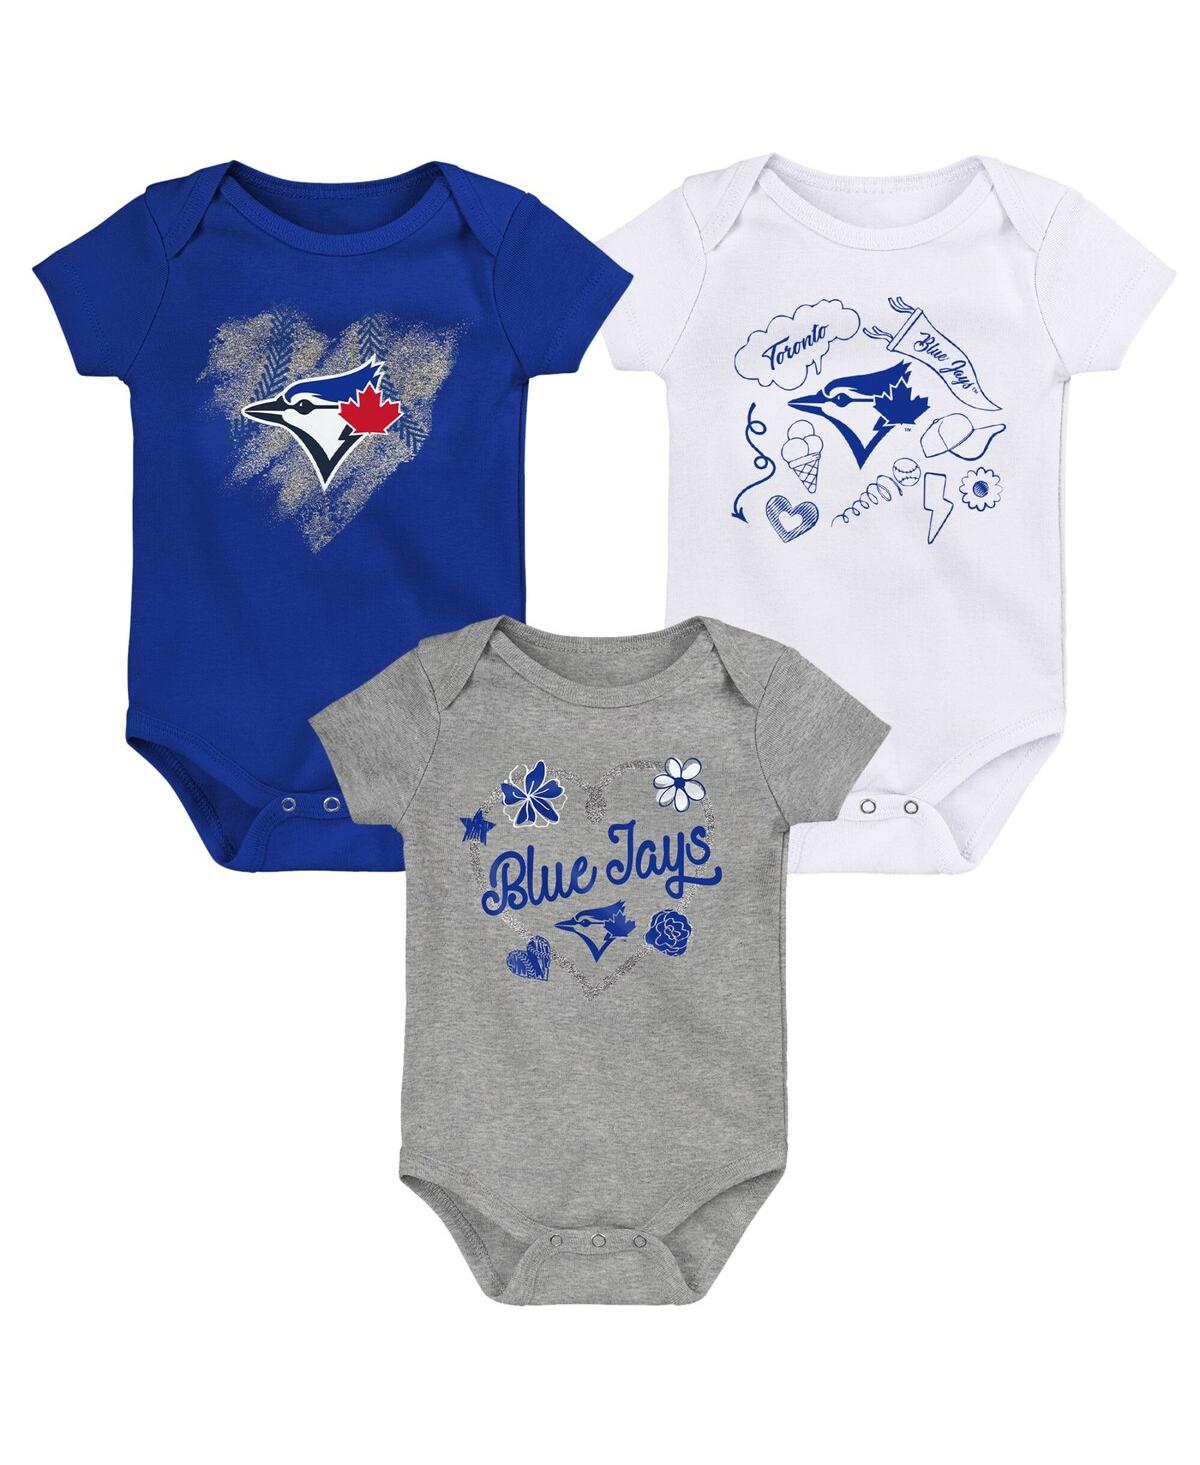 Shop Outerstuff Infant Boys And Girls Royal, White, Heathered Gray Toronto Blue Jays Batter Up 3-pack Bodysuit Set In Royal,white,heathered Gray